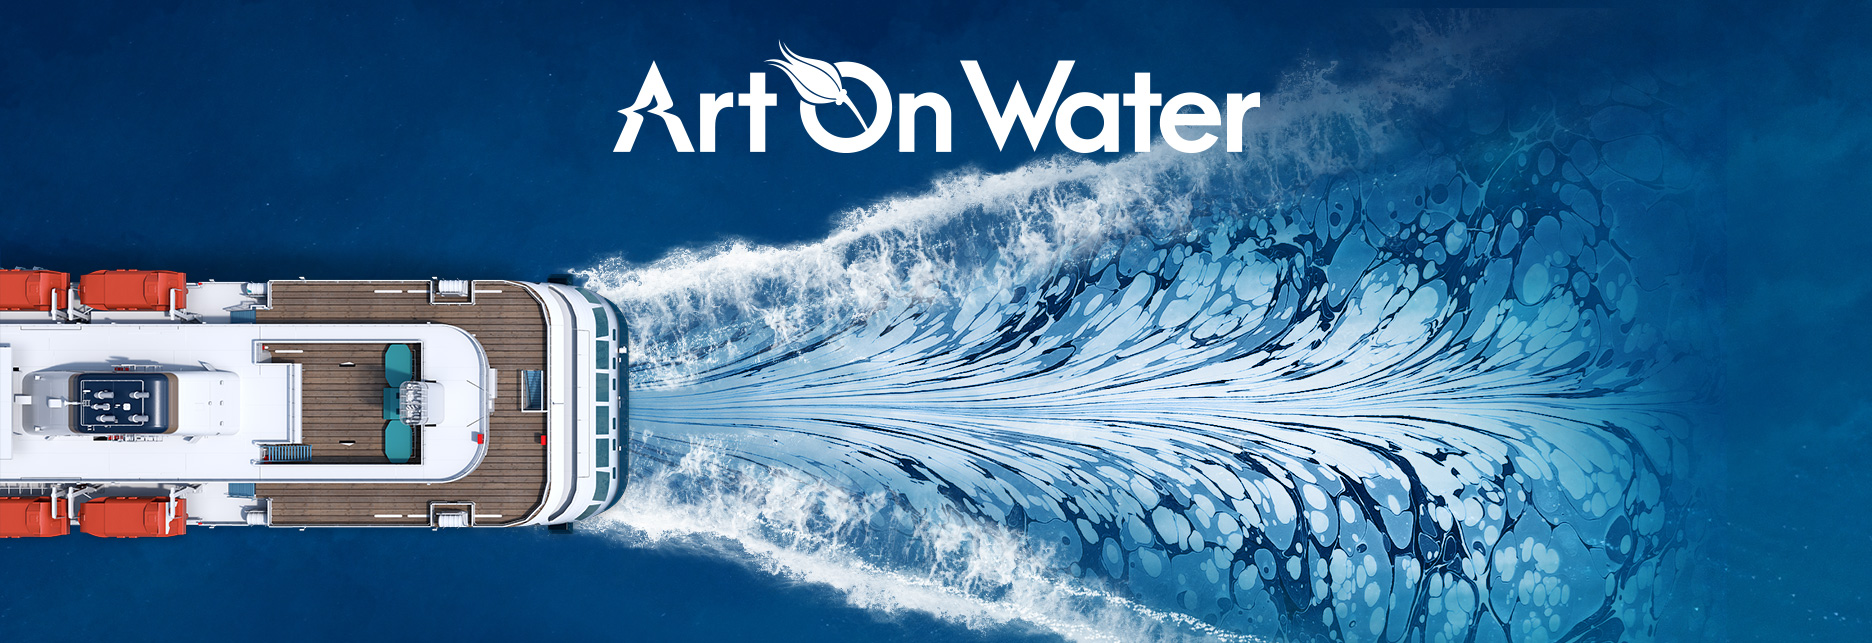 The Art On Water